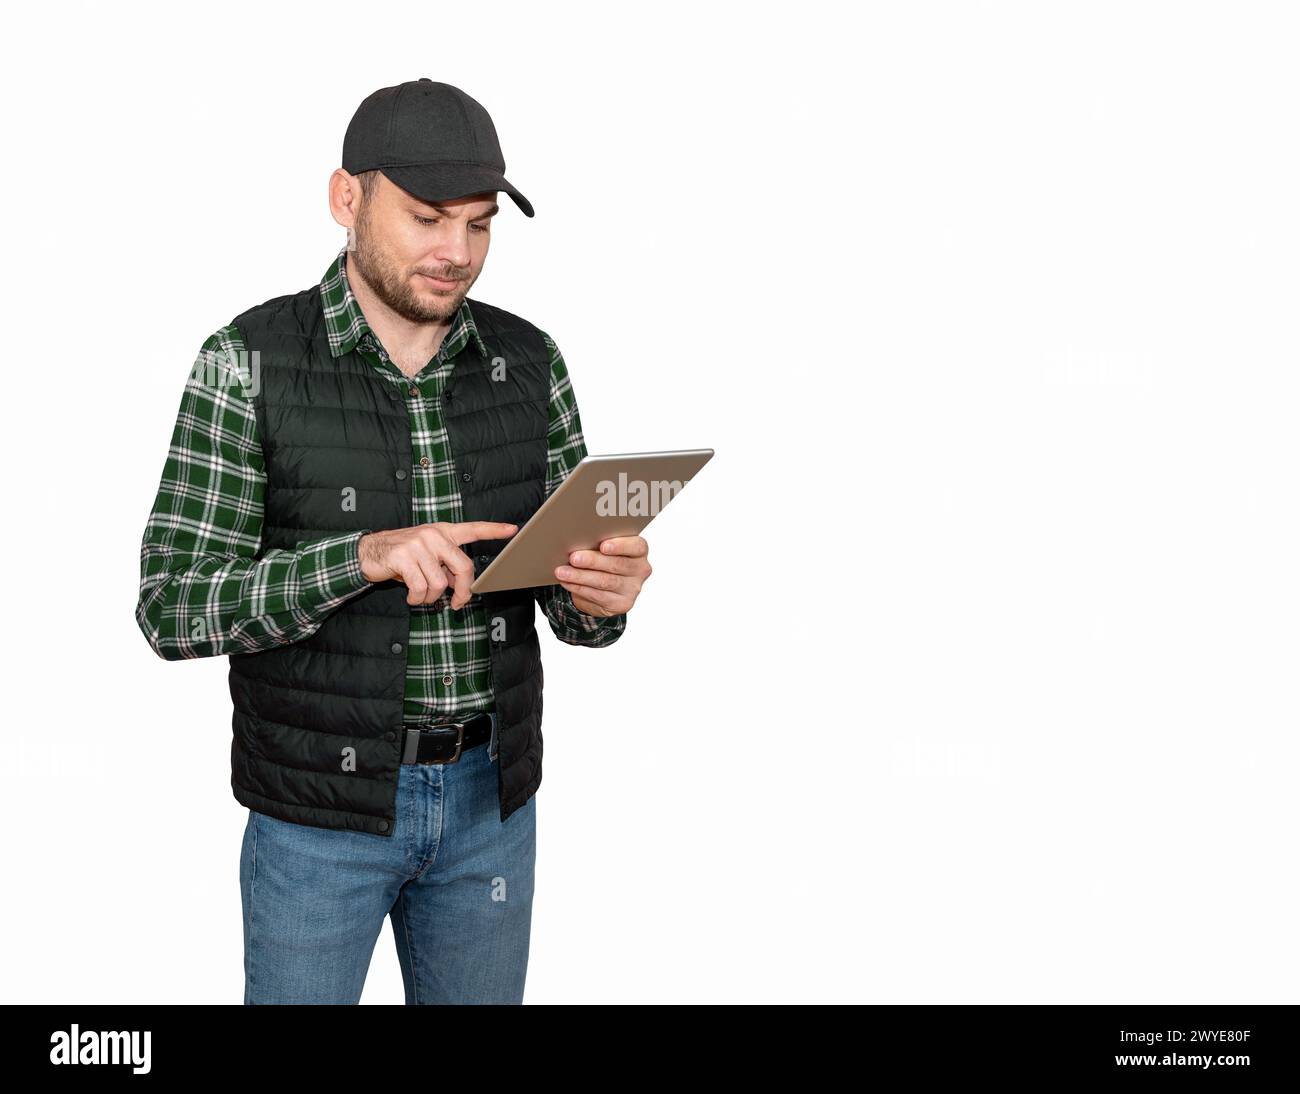 Isolated foreman or farmer wearing casual outfit and black cup using digital tablet and smiling. Stock Photo